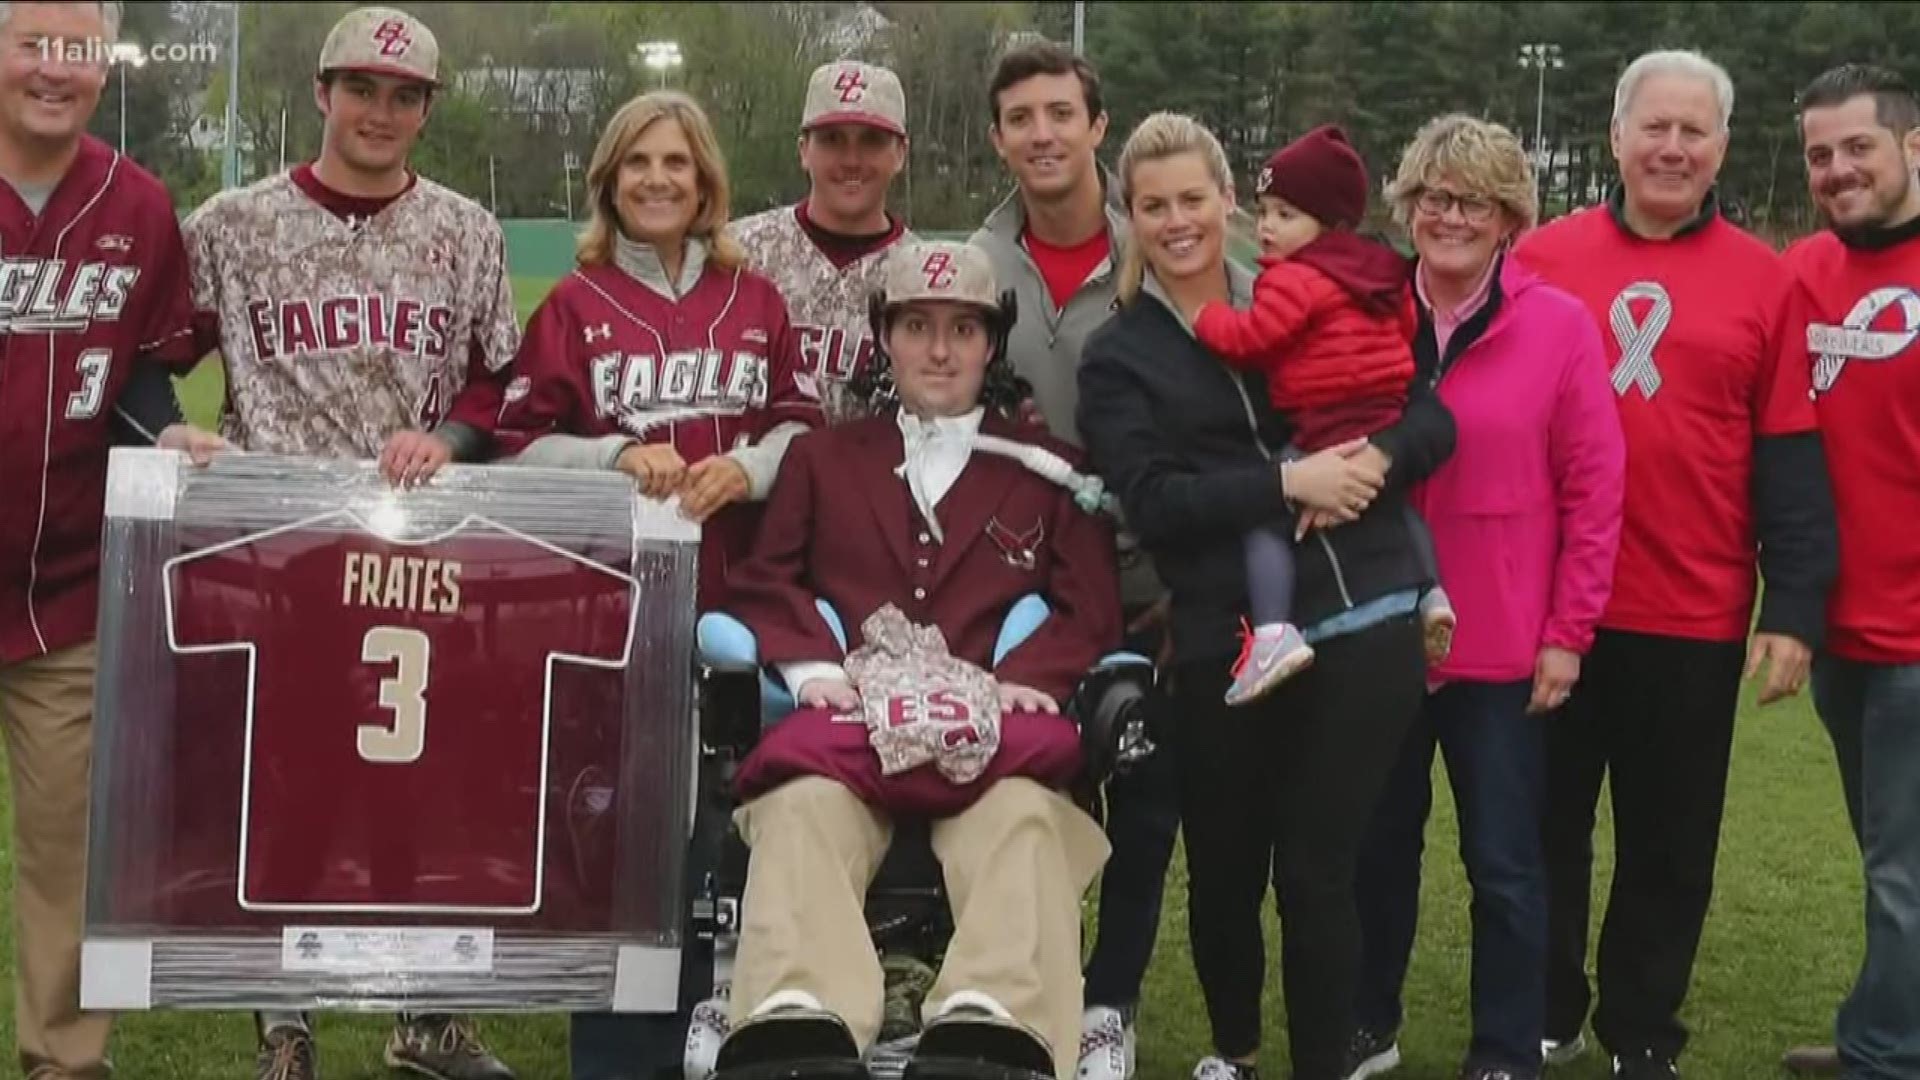 Pete Frates, who helped bring the "ice bucket challenge" to the public consciousness and raised awareness for ALS worldwide, died on Monday at 34.